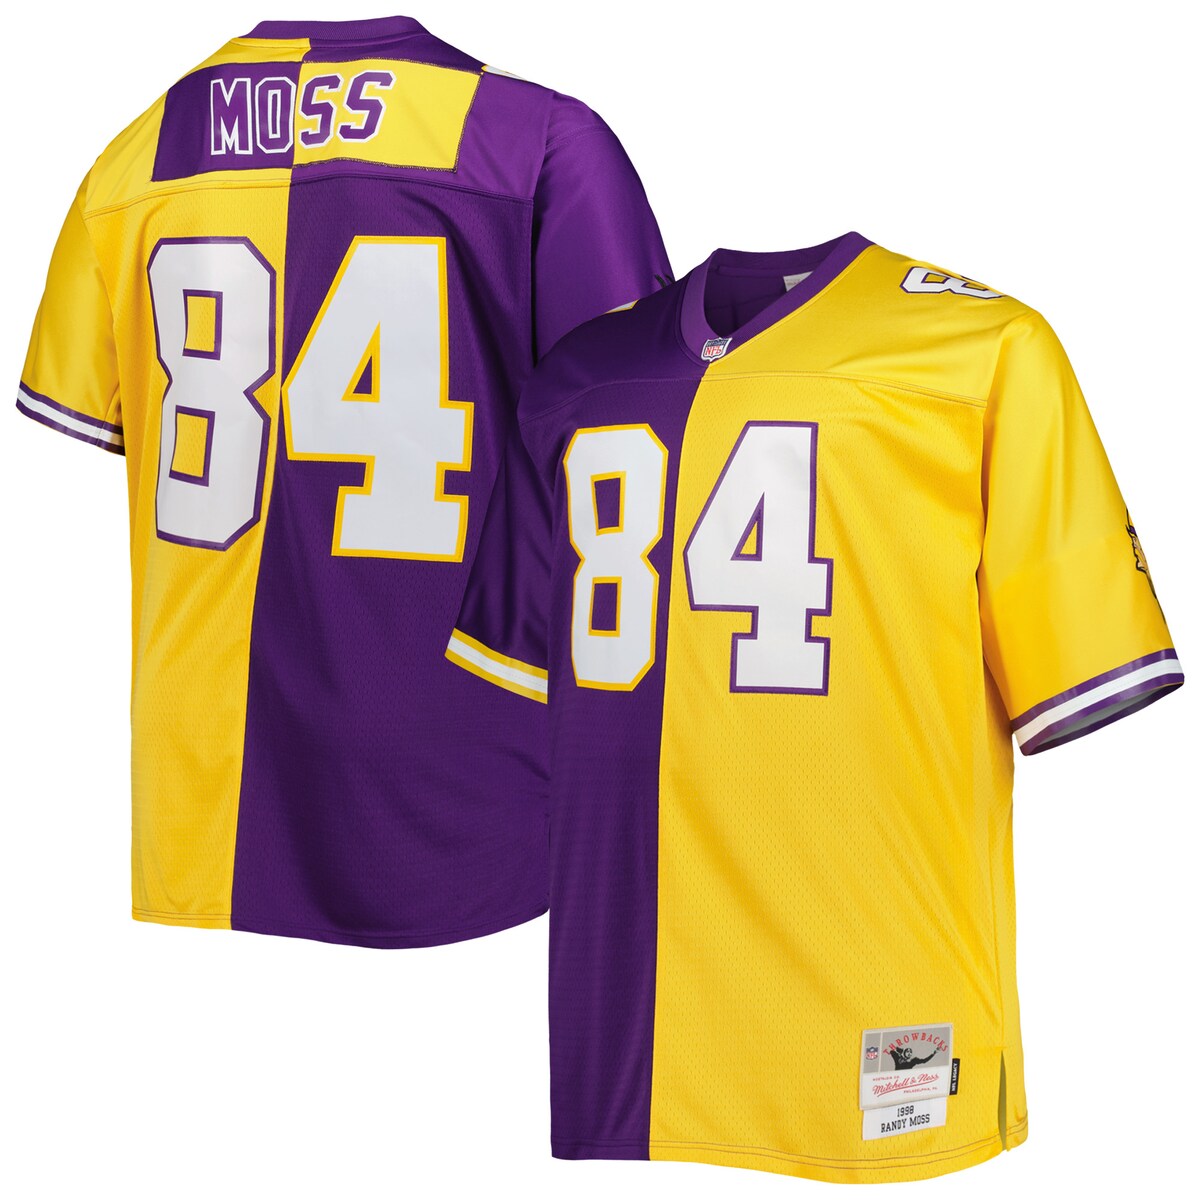 Pay homage to one of the greatest players in NFL history with this Randy Moss Split Legacy Replica jersey by Mitchell & ...